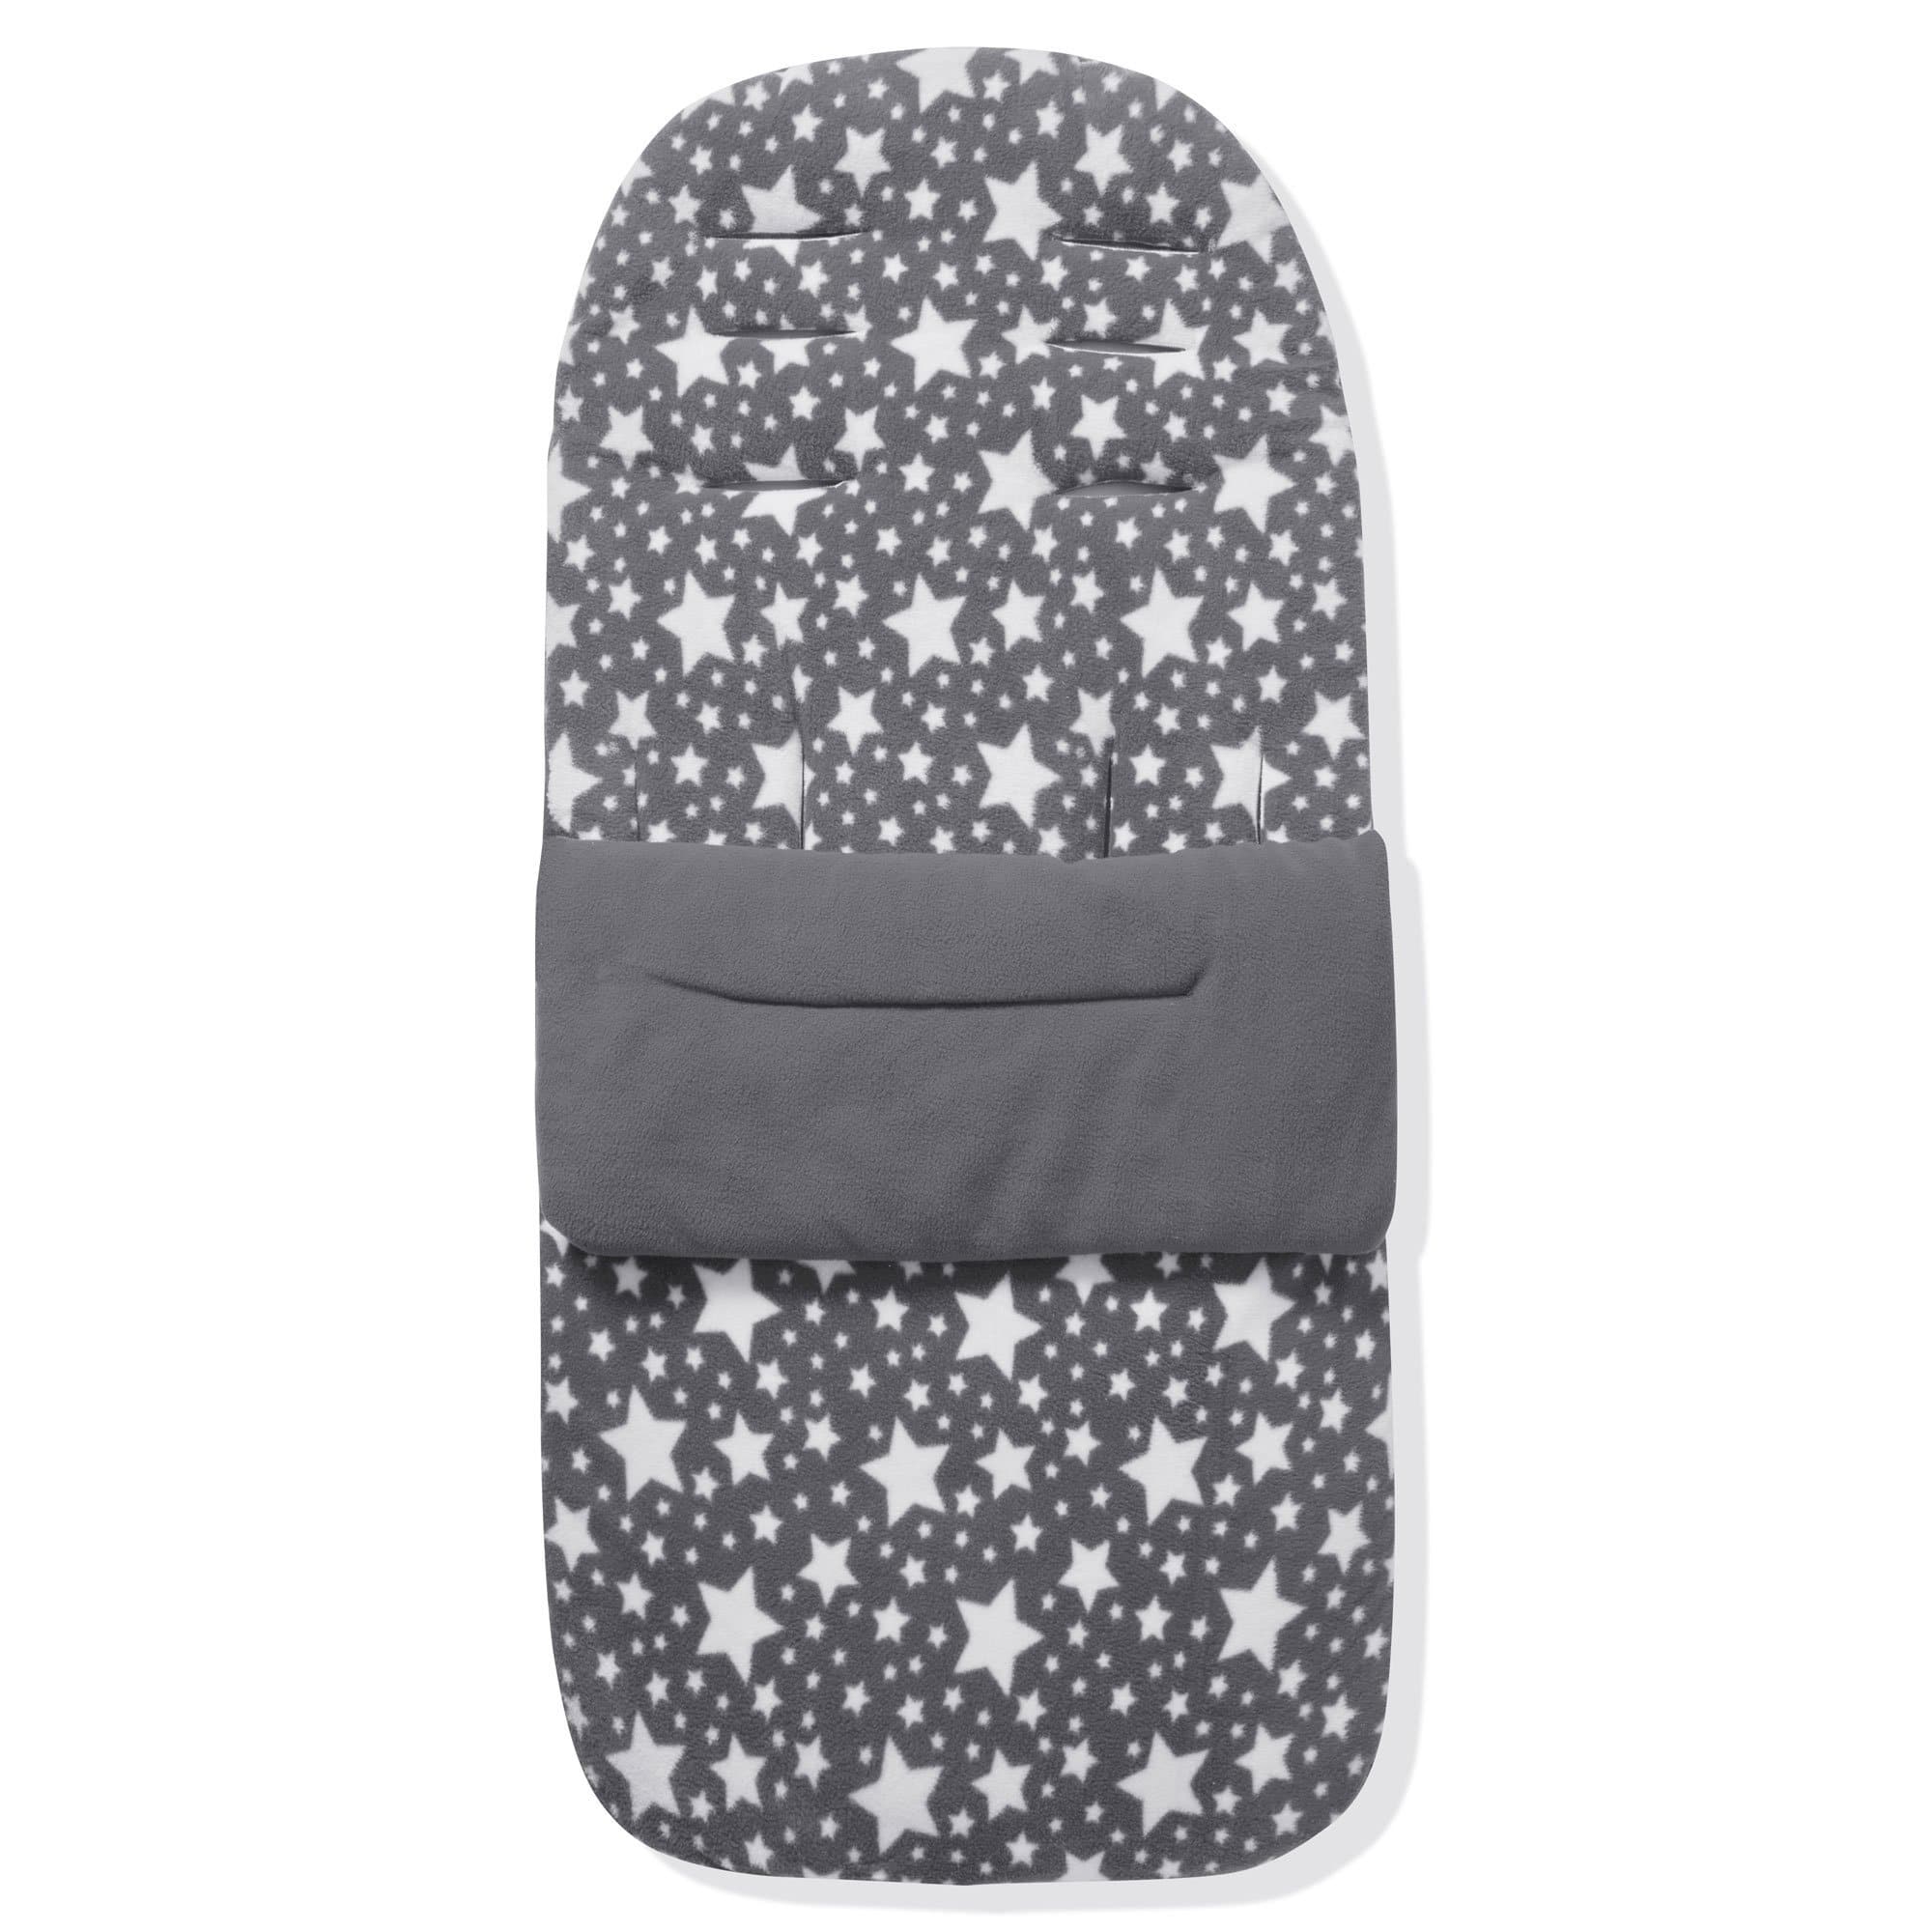 Fleece Footmuff / Cosy Toes Compatible With Bloom - Grey Star / Fits All Models | For Your Little One